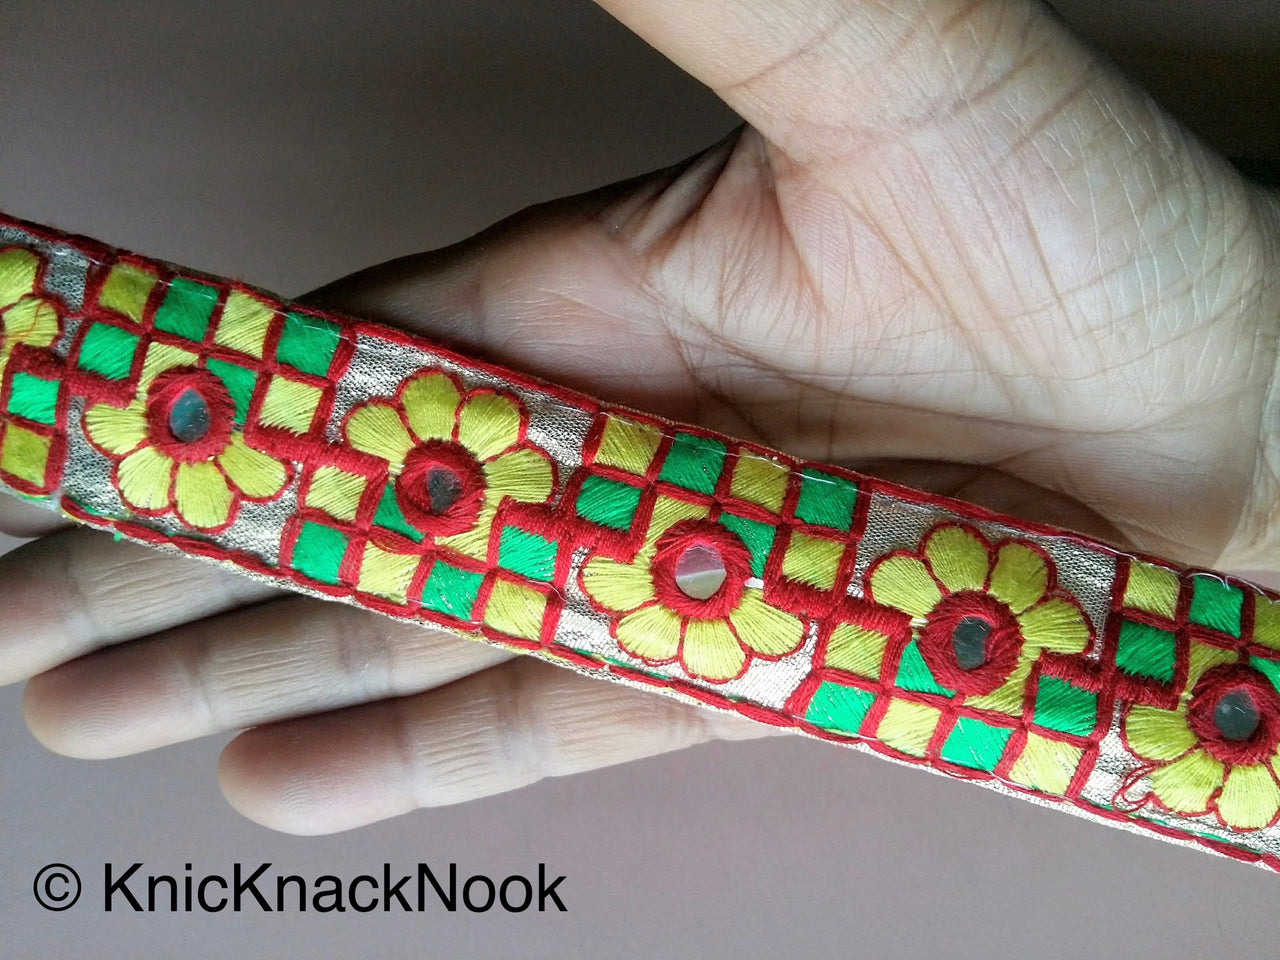 Gold Mirrored Fabric Trim With Yellow, Green And Red Floral And Square Embroidery, Approx. 32mm Wide